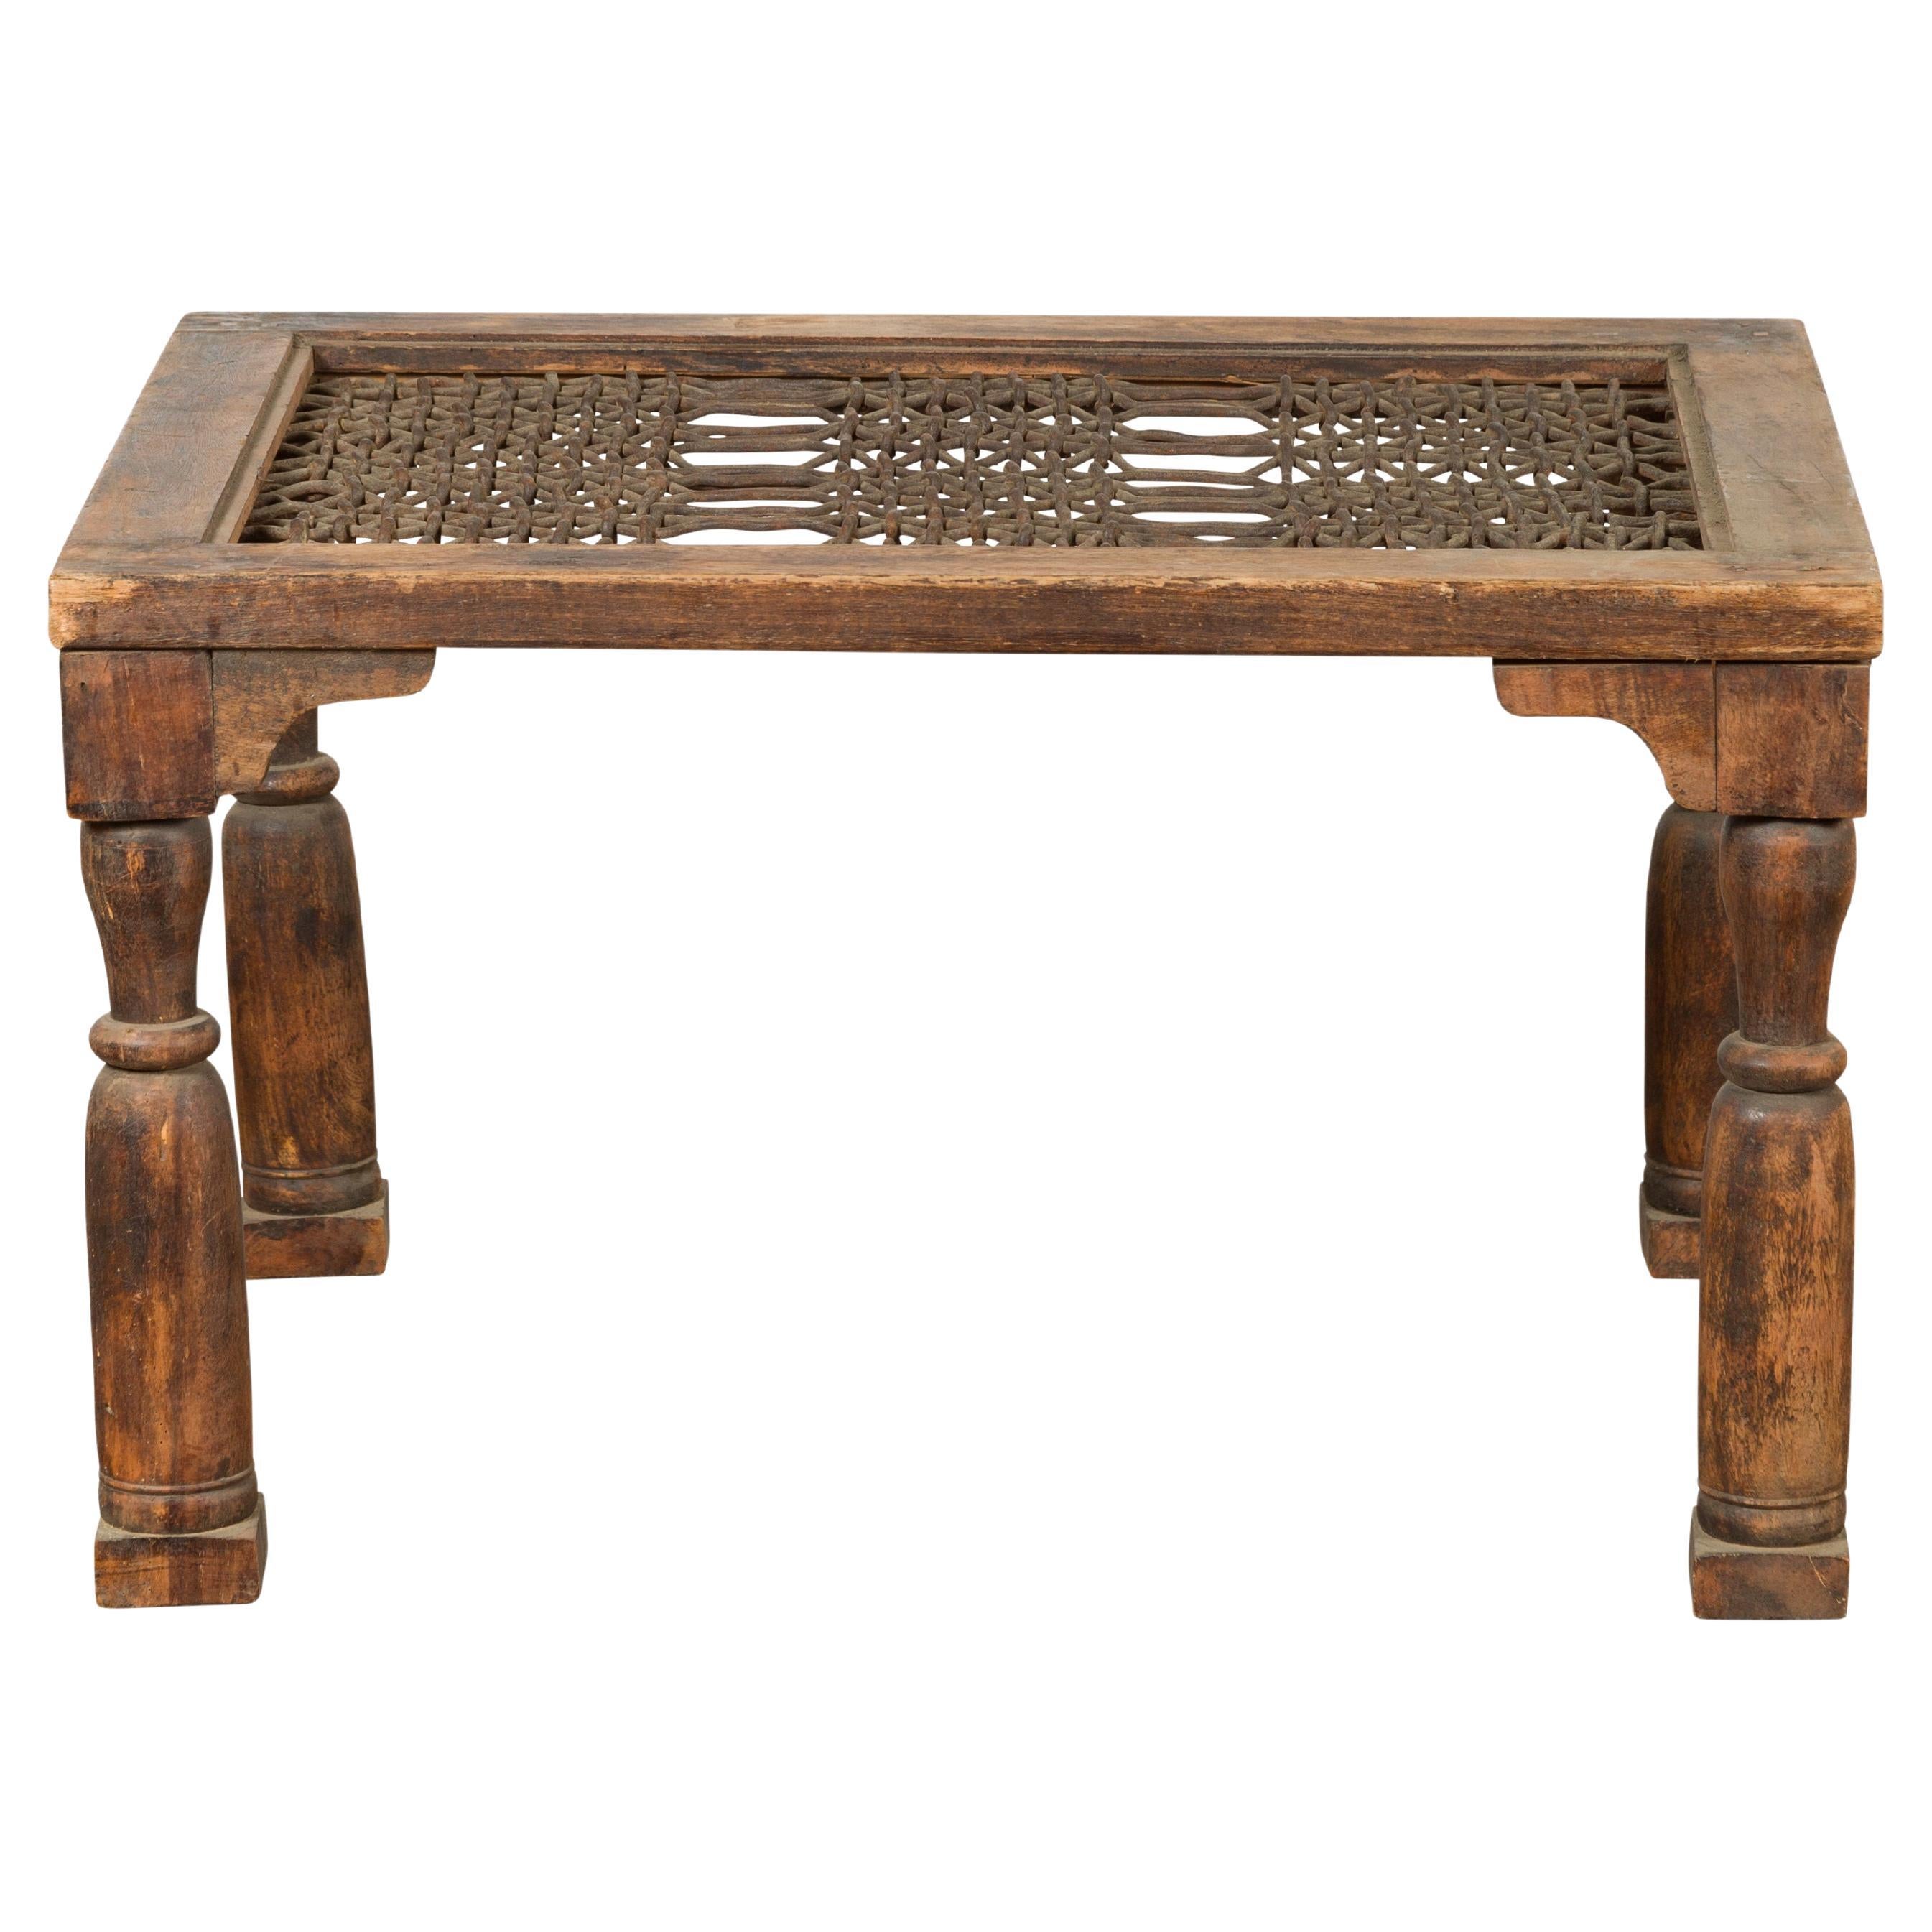 Indian Antique Window Grate Made into a Coffee Table with Turned Baluster Legs For Sale